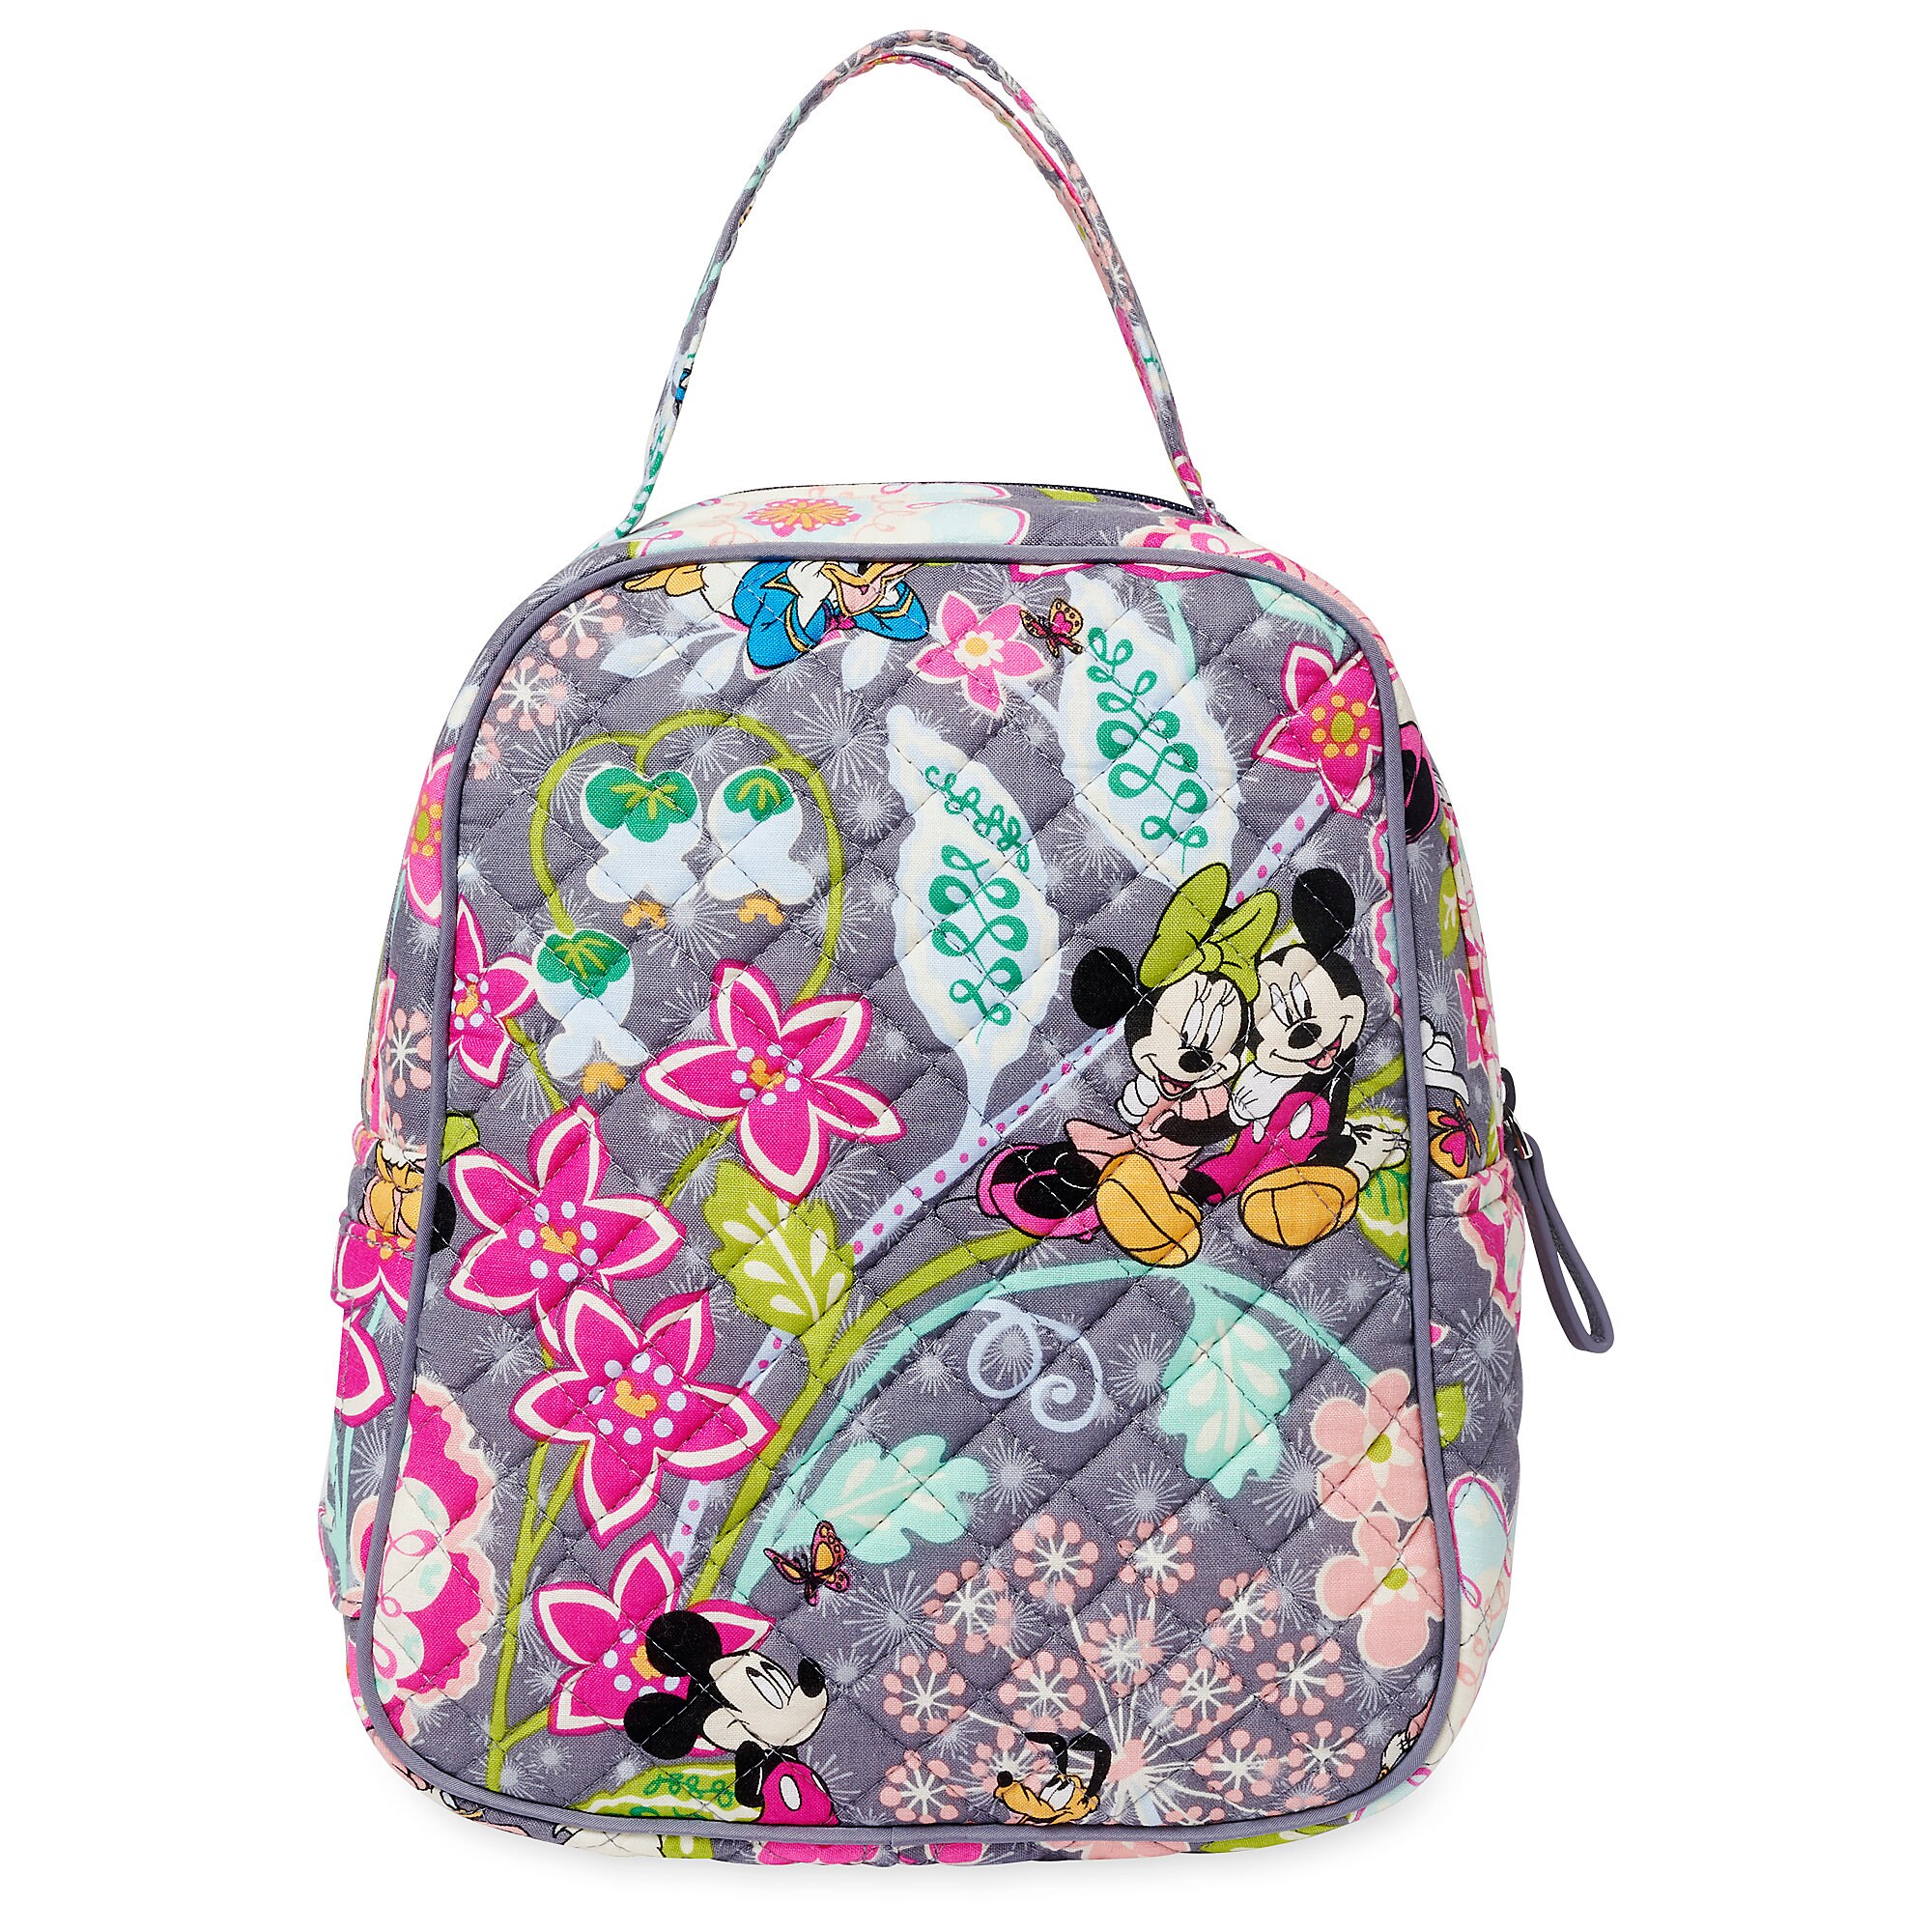 Mickey Mouse and Friends Lunch Bunch Bag by Vera Bradley